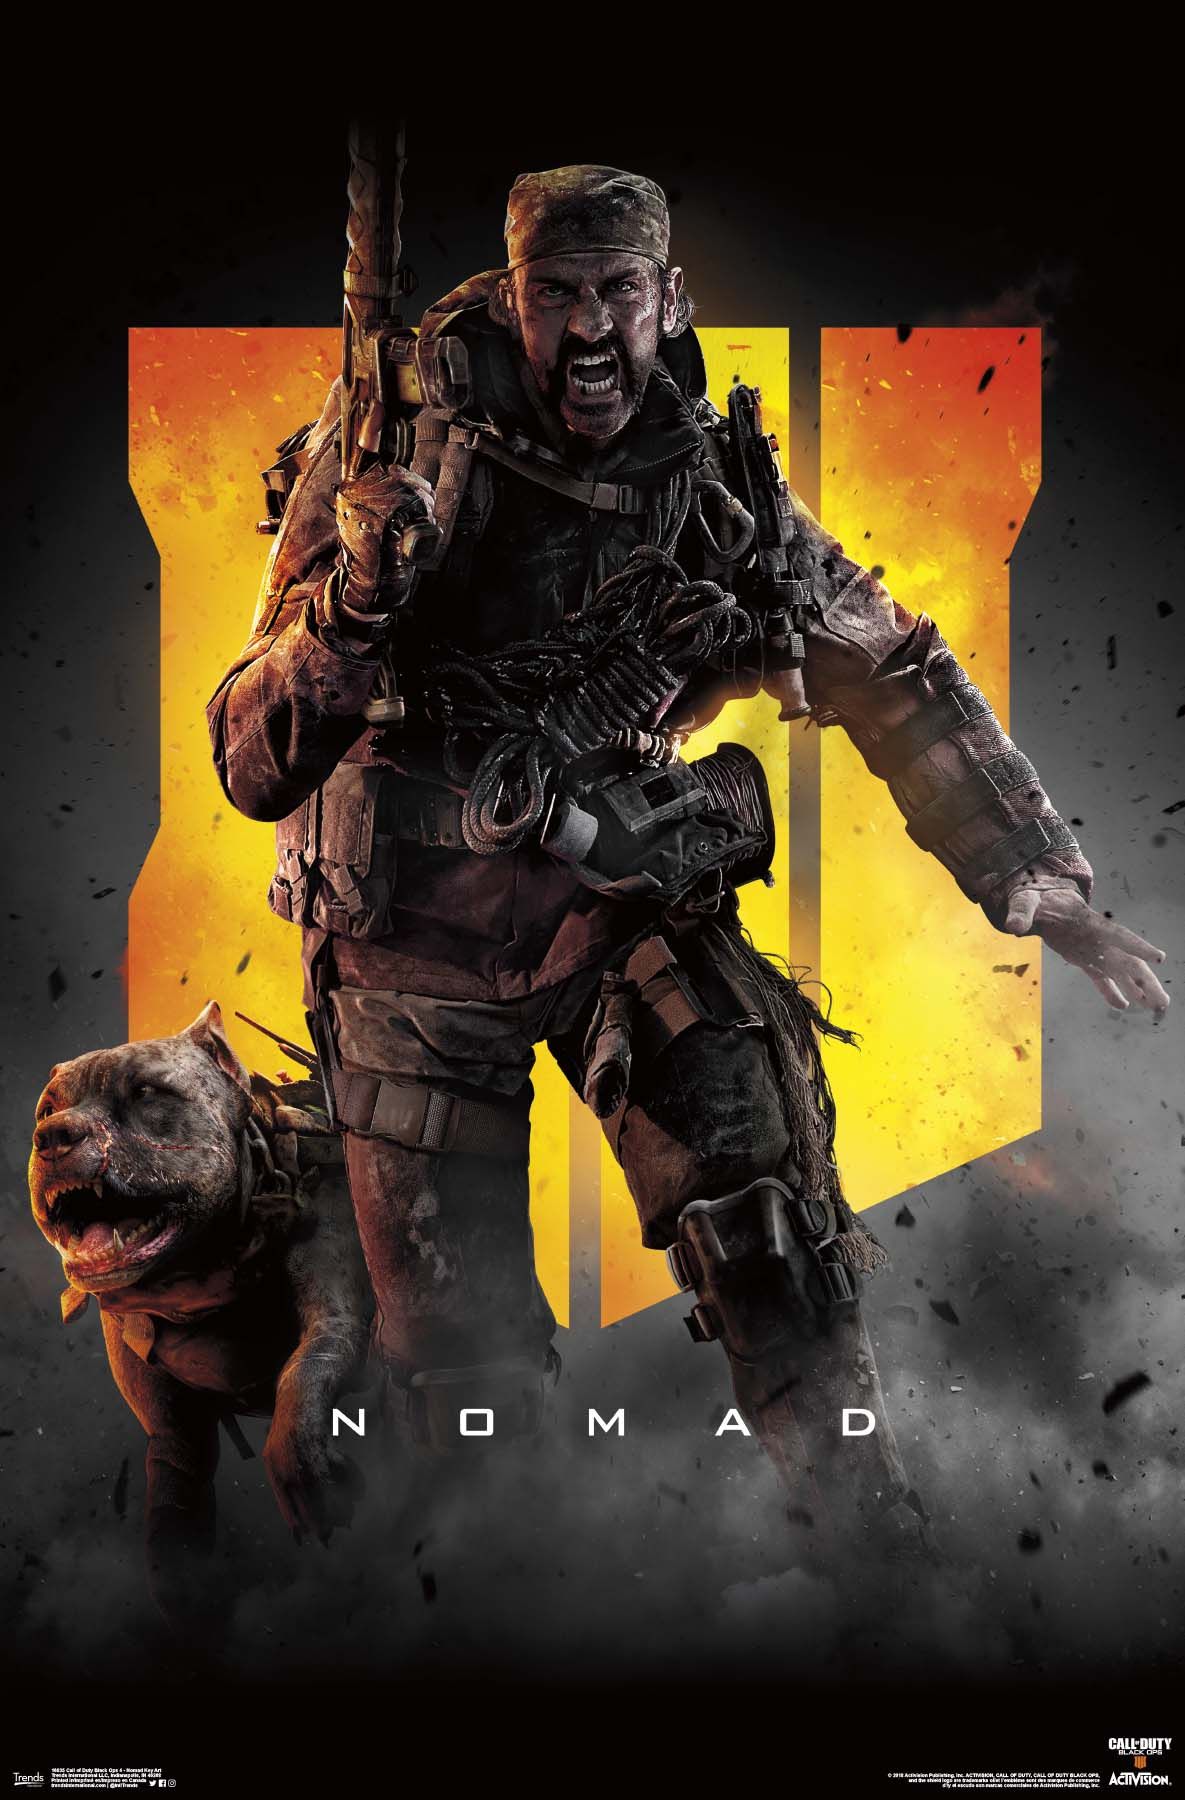 Call of Duty: Black Ops 4 Key Art Poster and Poster Mount Bundle.com. Call of duty black, Call of duty, Black ops 4